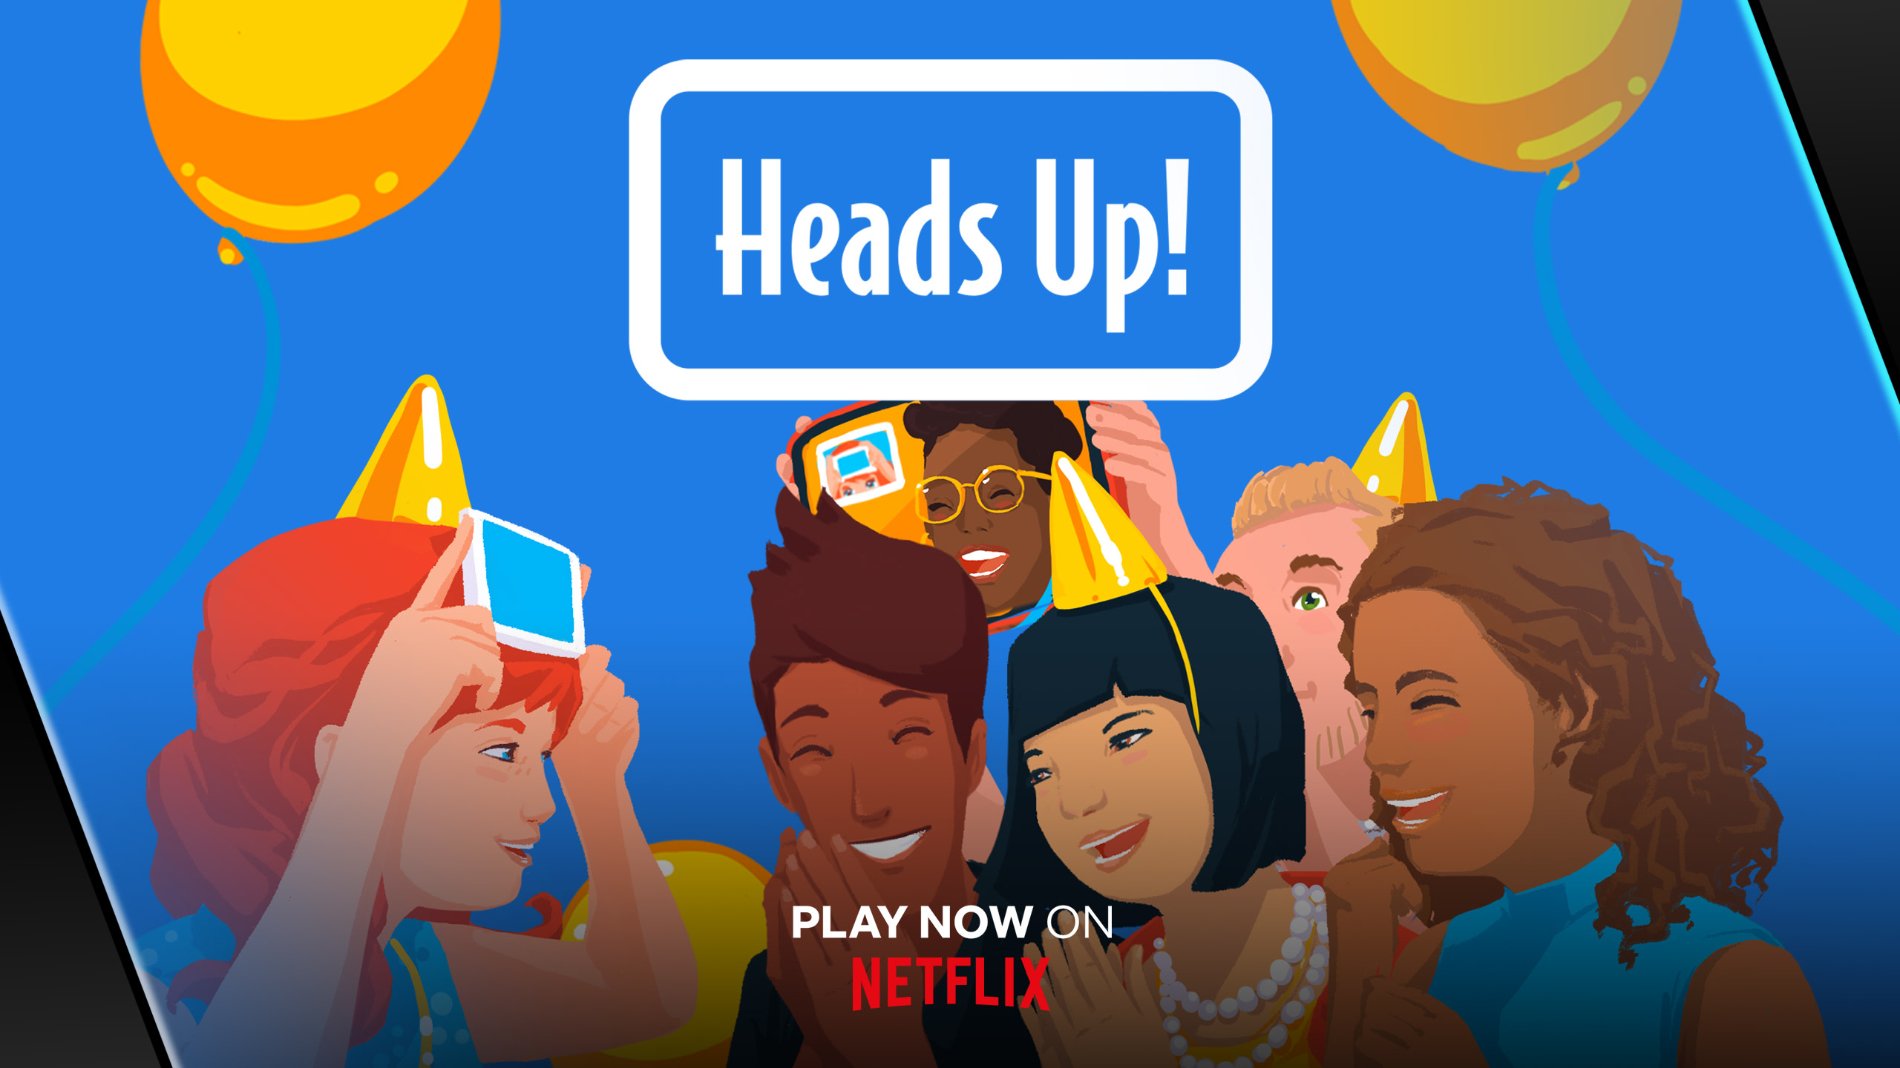 Netflix Adds to Its Gaming Catalog With Exclusive Version of Heads Up!